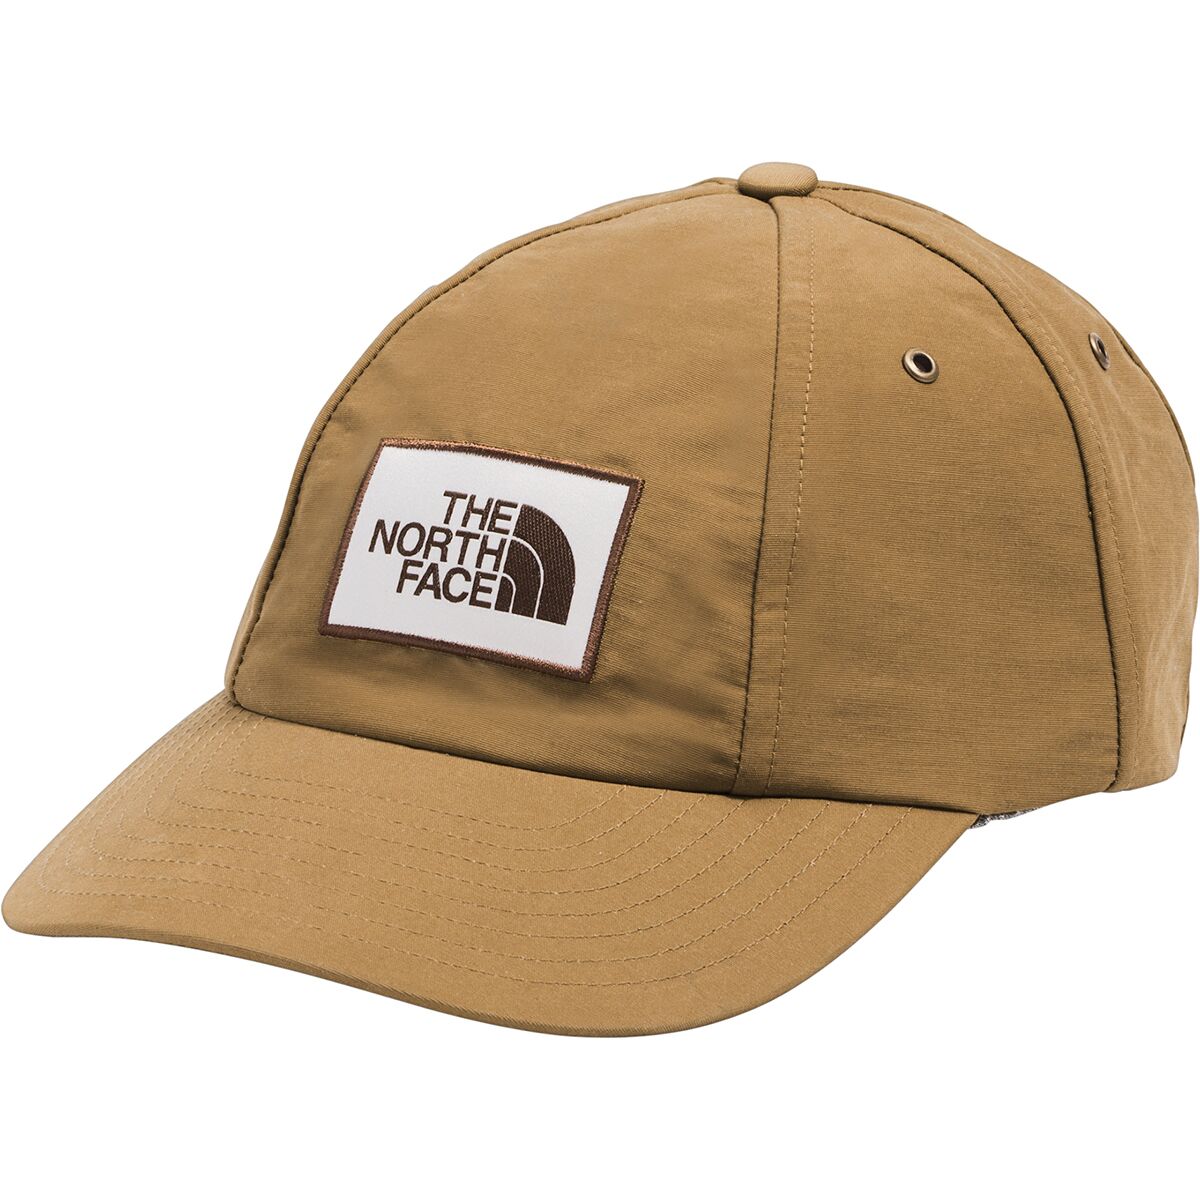 The North Face Berkeley 6 Panel Baseball Hat - Accessories